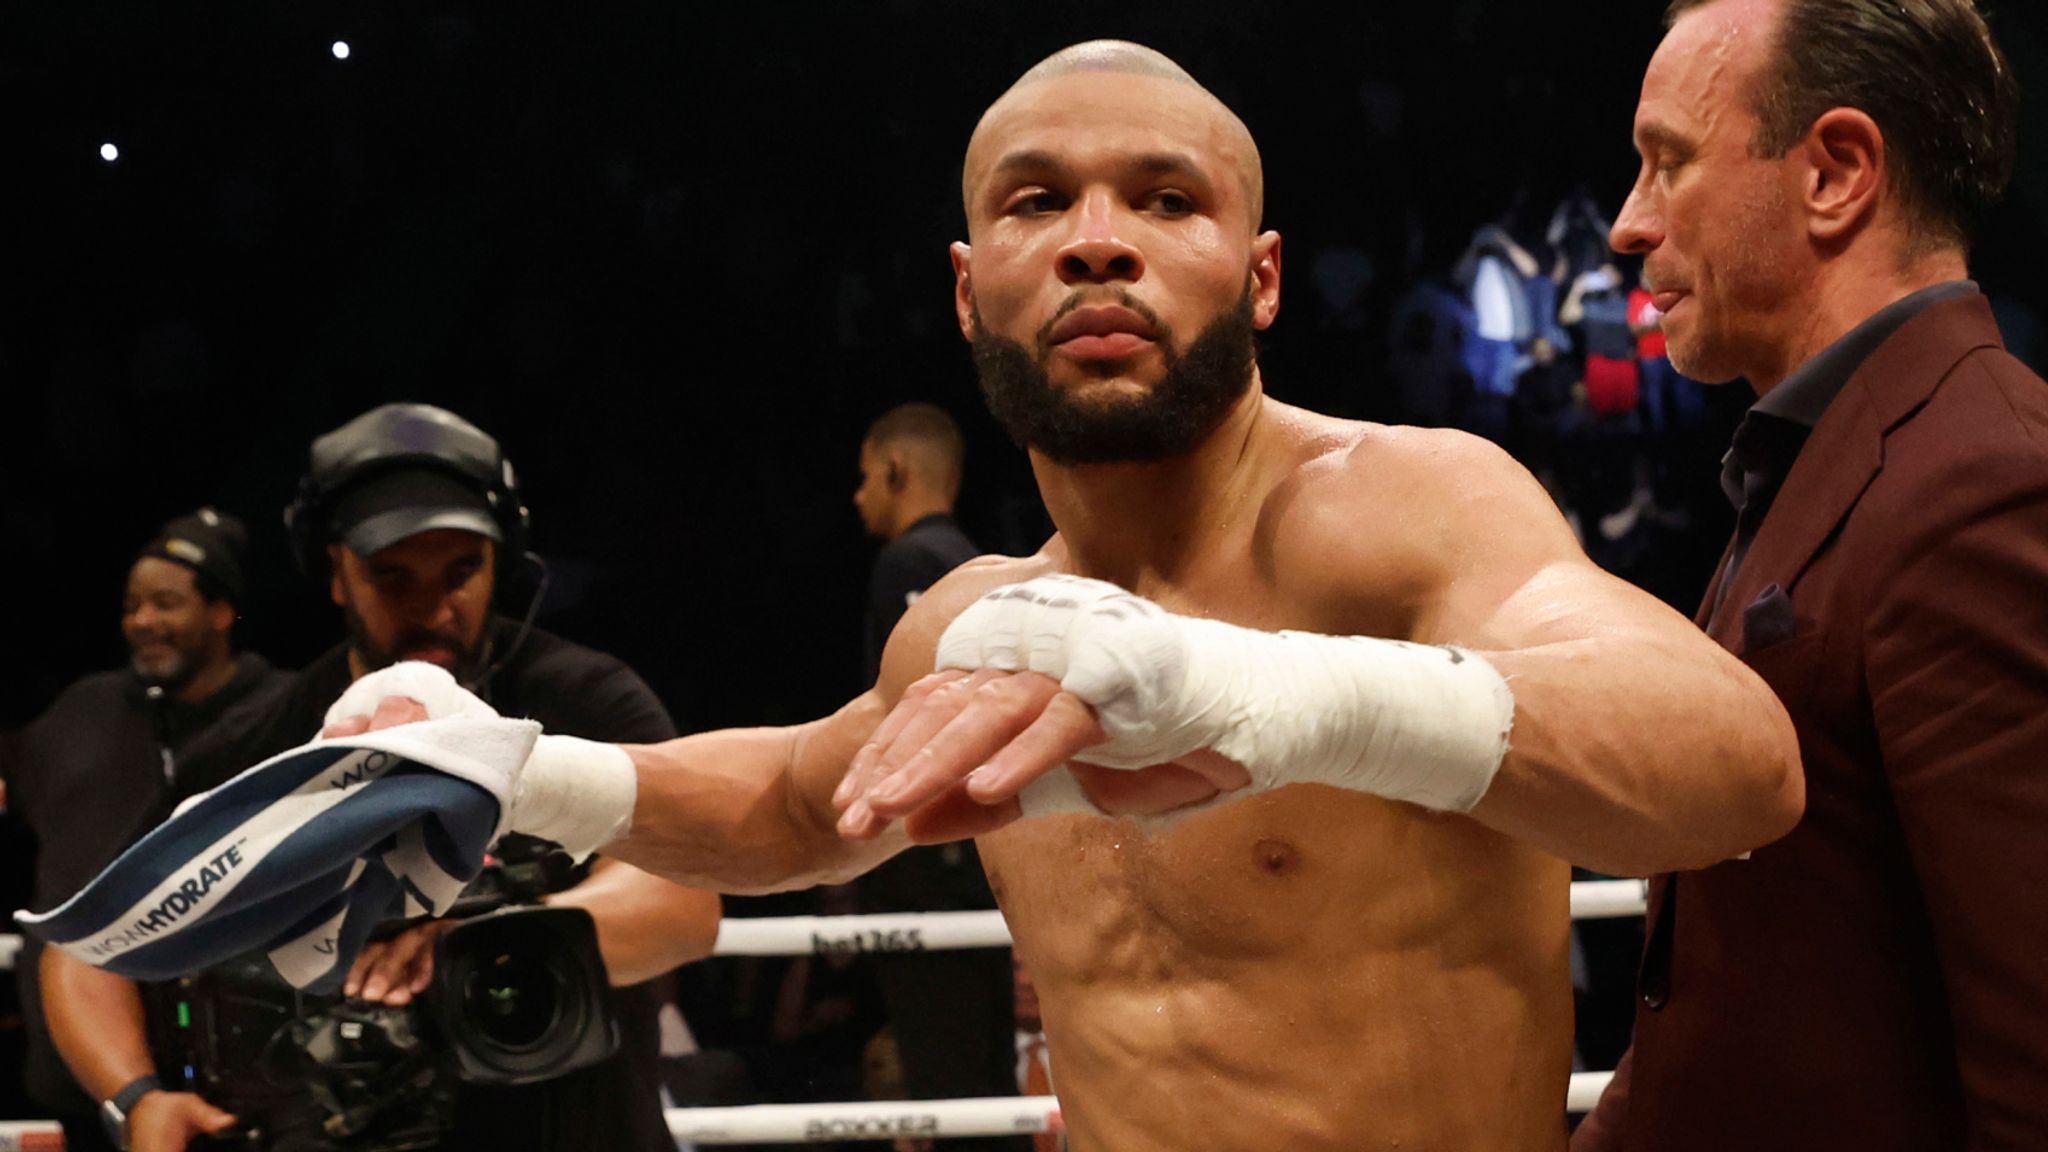 Chris Eubank Jr on winning the greatest gamble of his career in the Liam Smith rematch and what comes next Boxing News Sky Sports